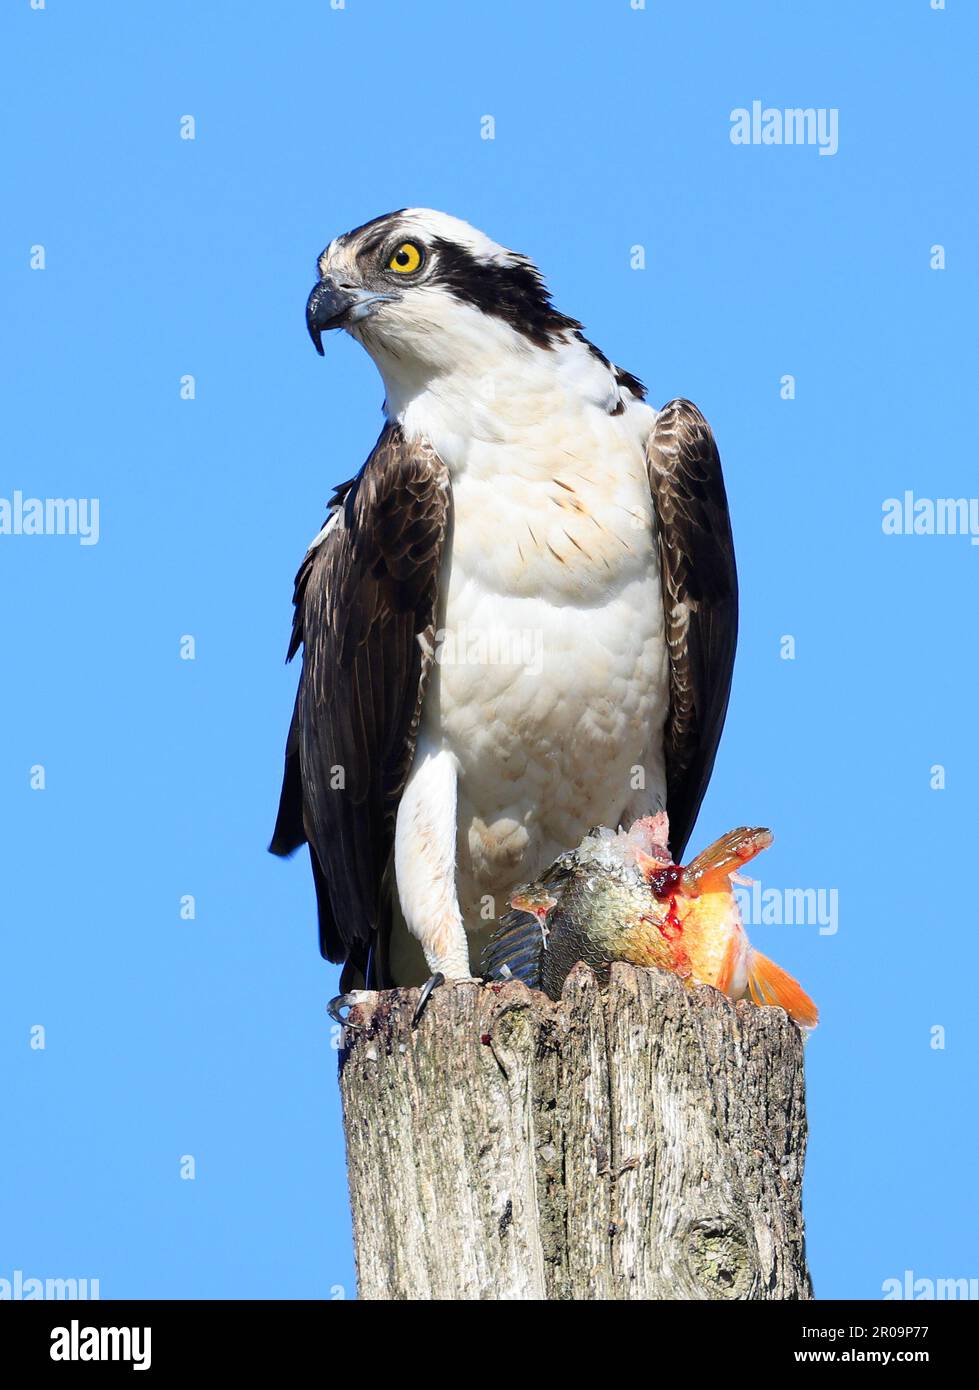 Osprey taking his fish meal on the wood pole, Quebec, Canada Stock Photo